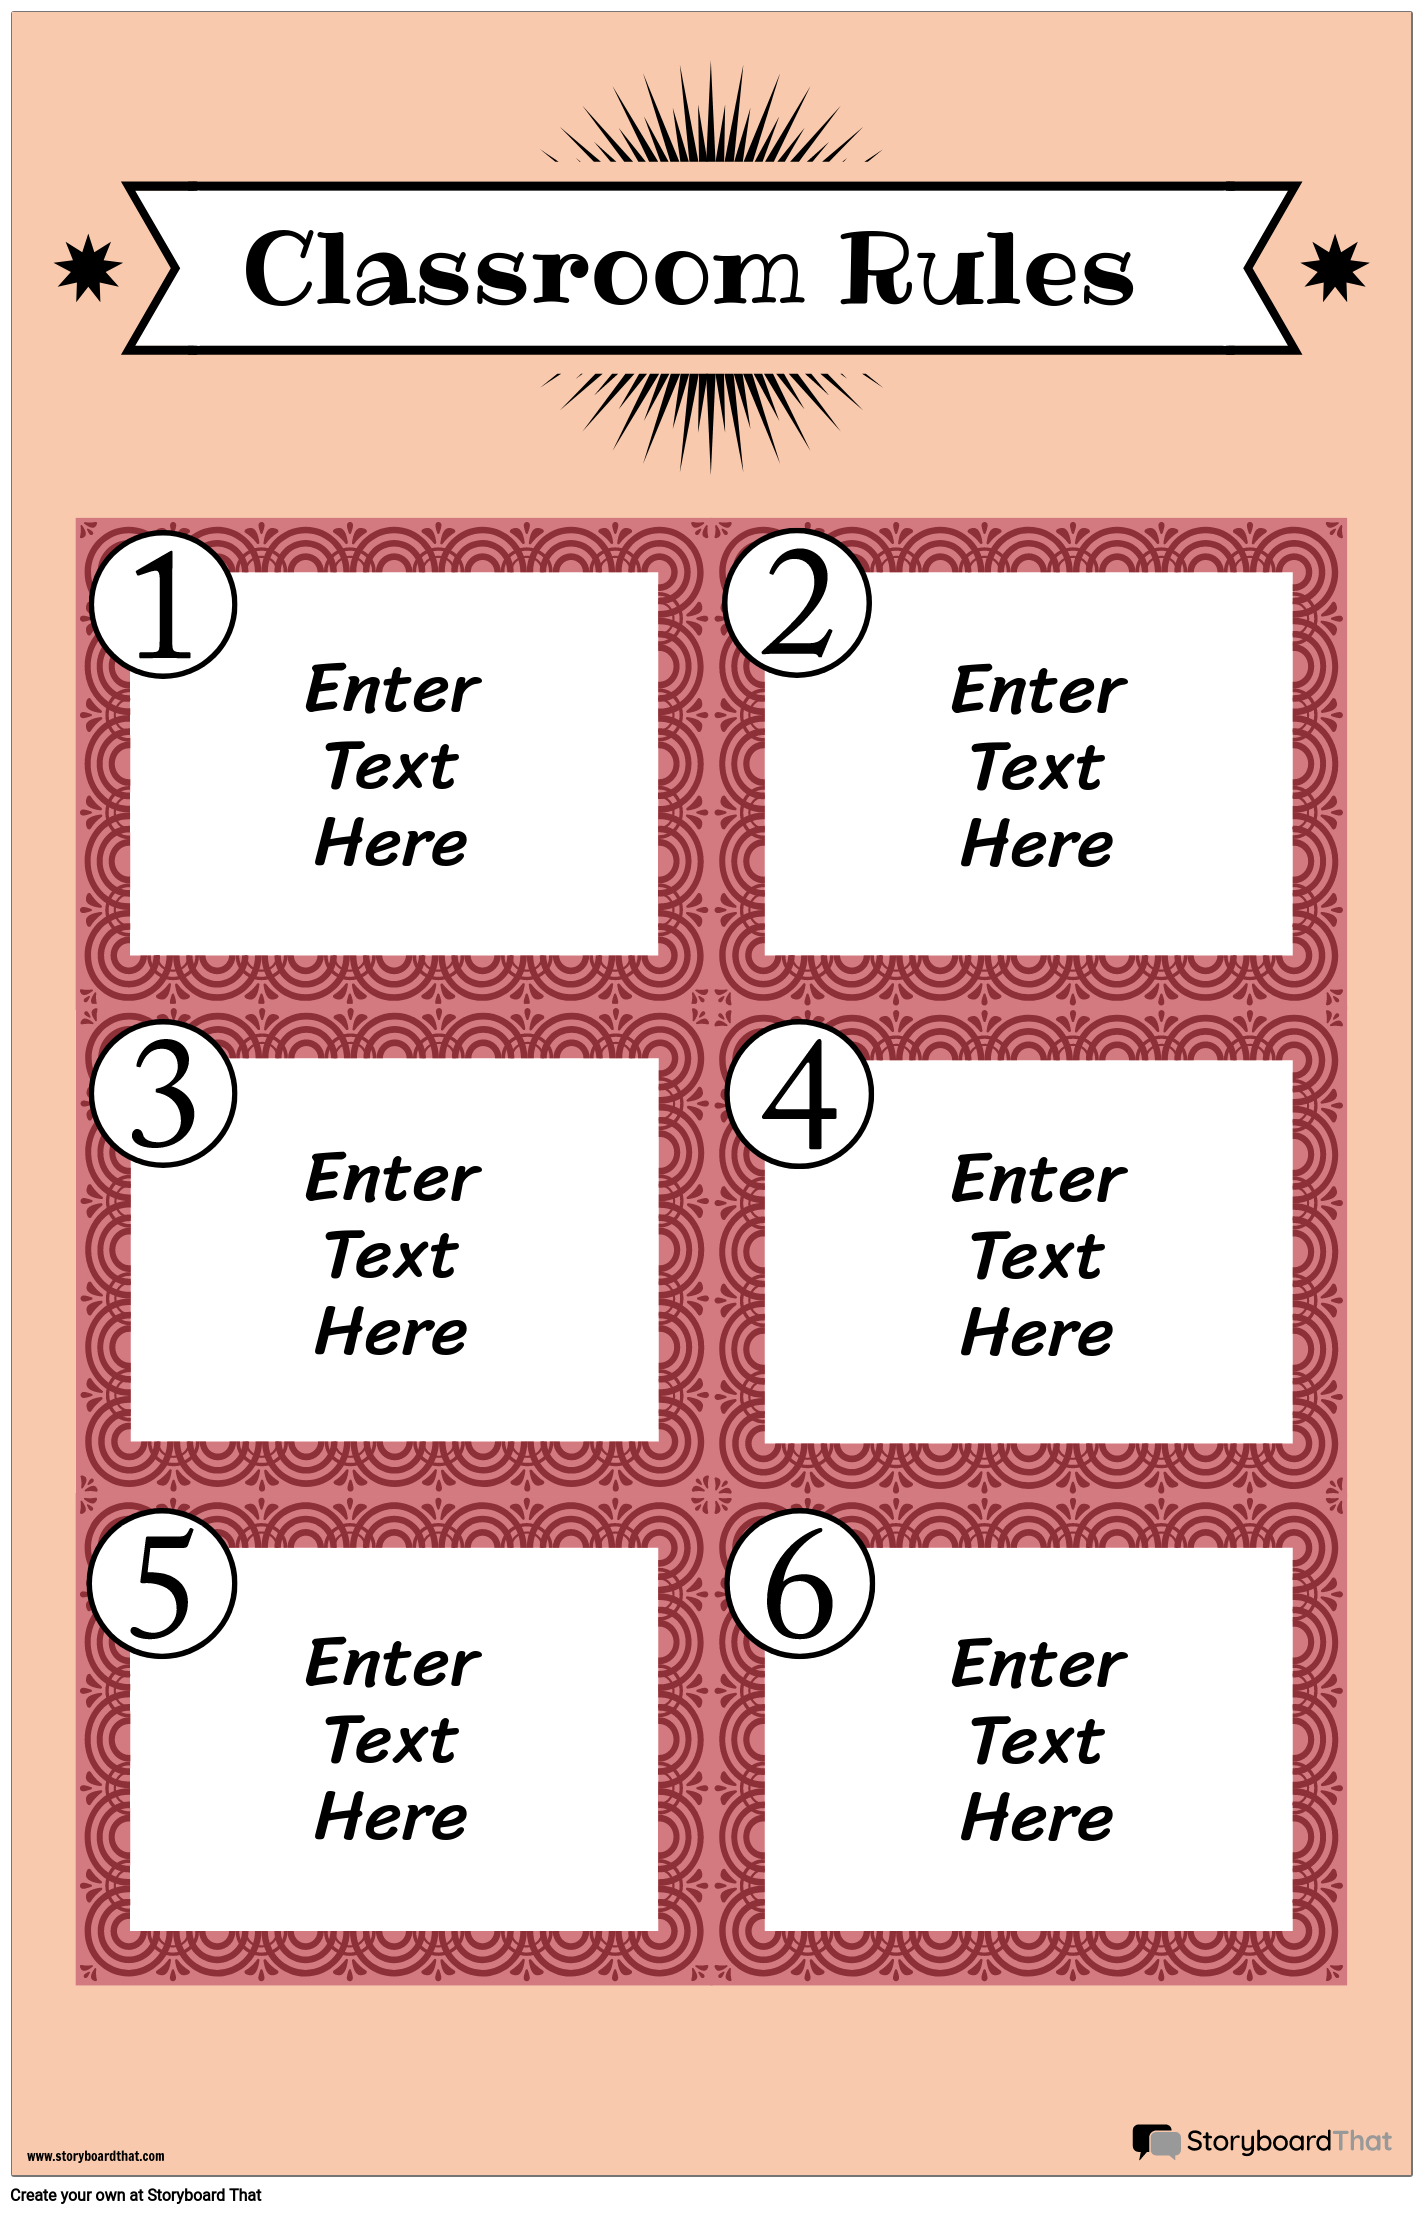 Free Classroom Rules Poster with Borders